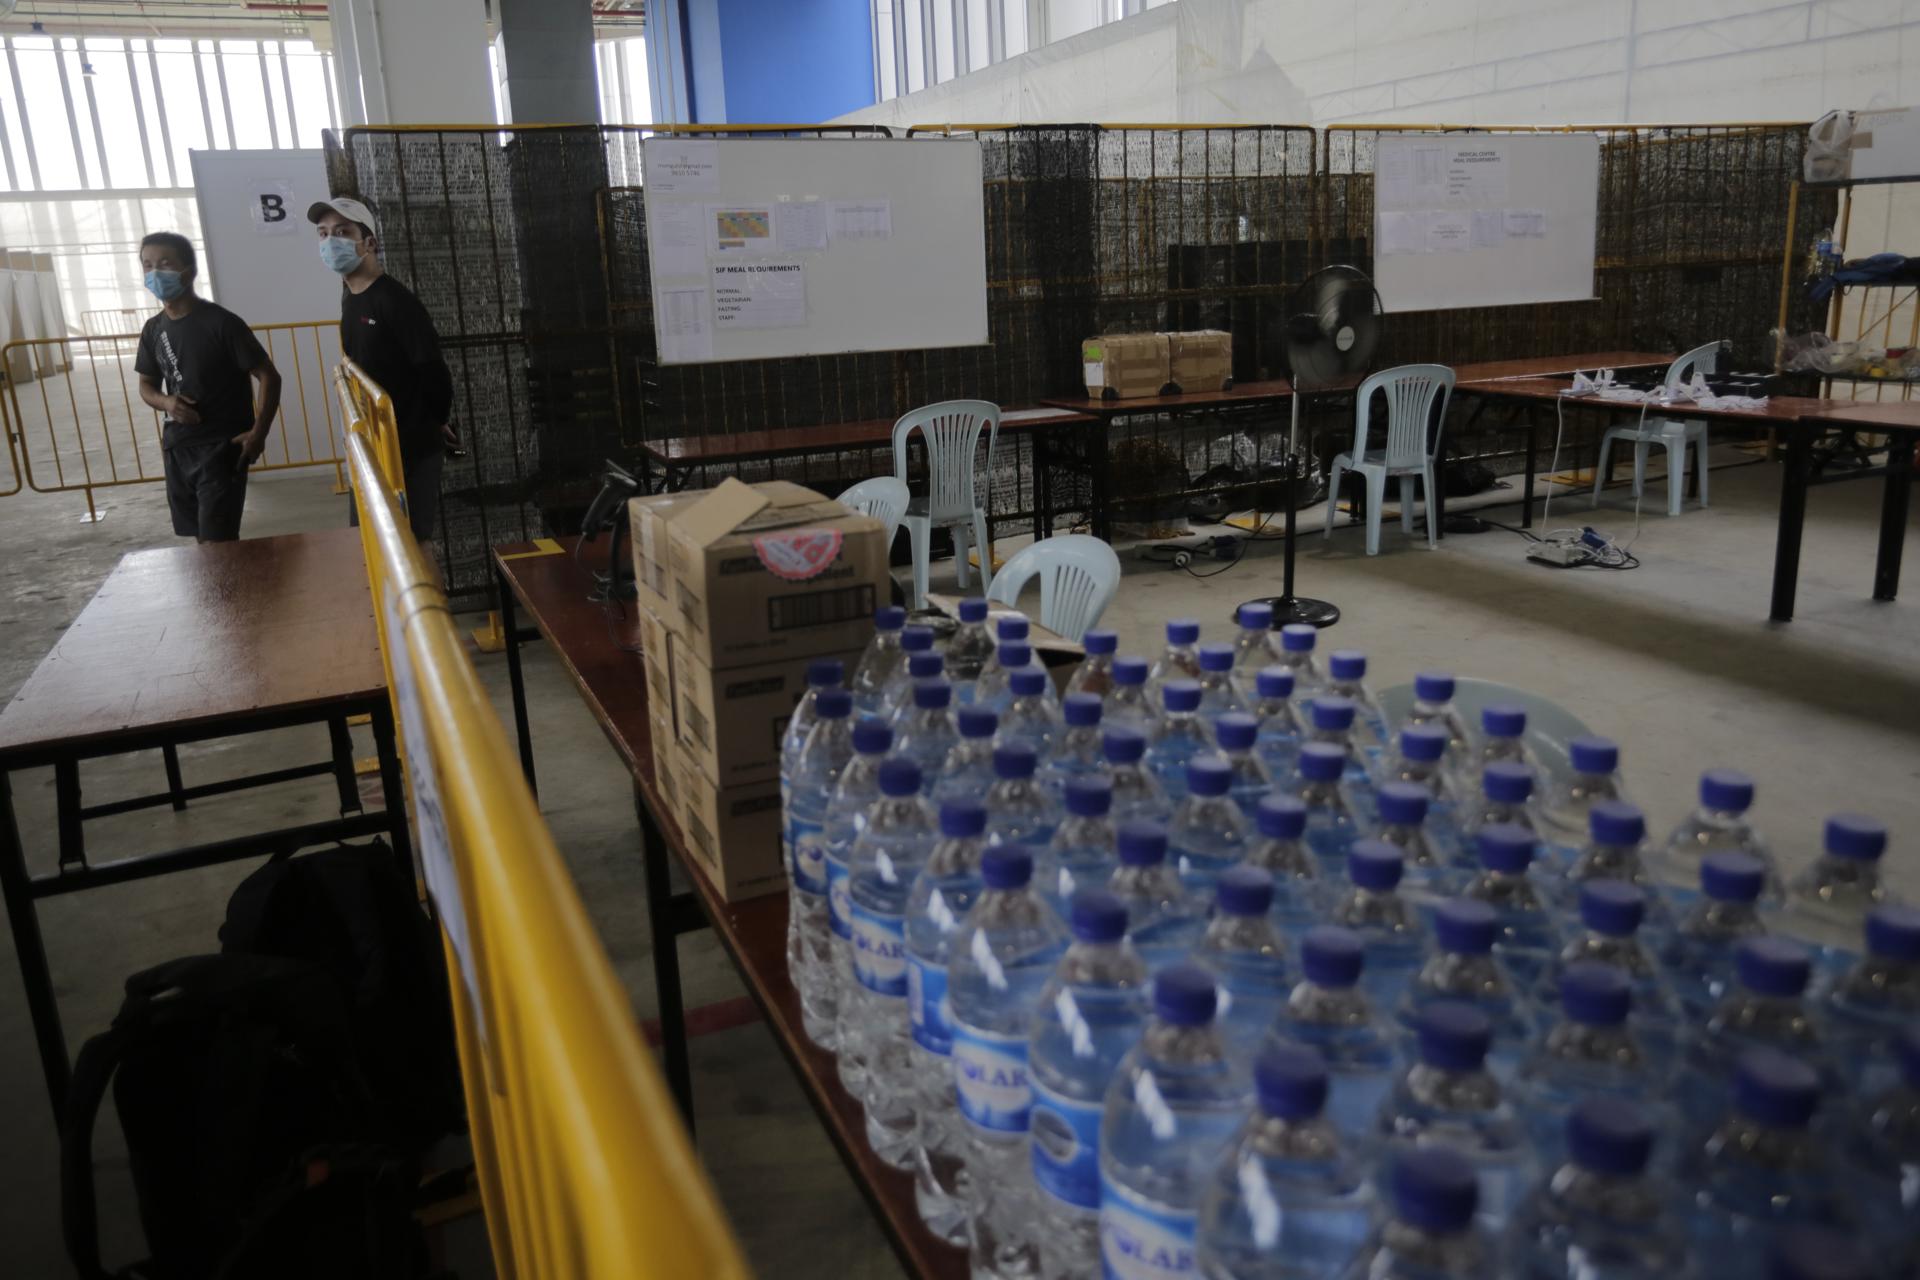 Bottles of water on a table at a swab isolation facility in the JTC Space·Tuas building in Singapore, 10 May 2020. EFE/EPA/FILE/WALLACE WOON